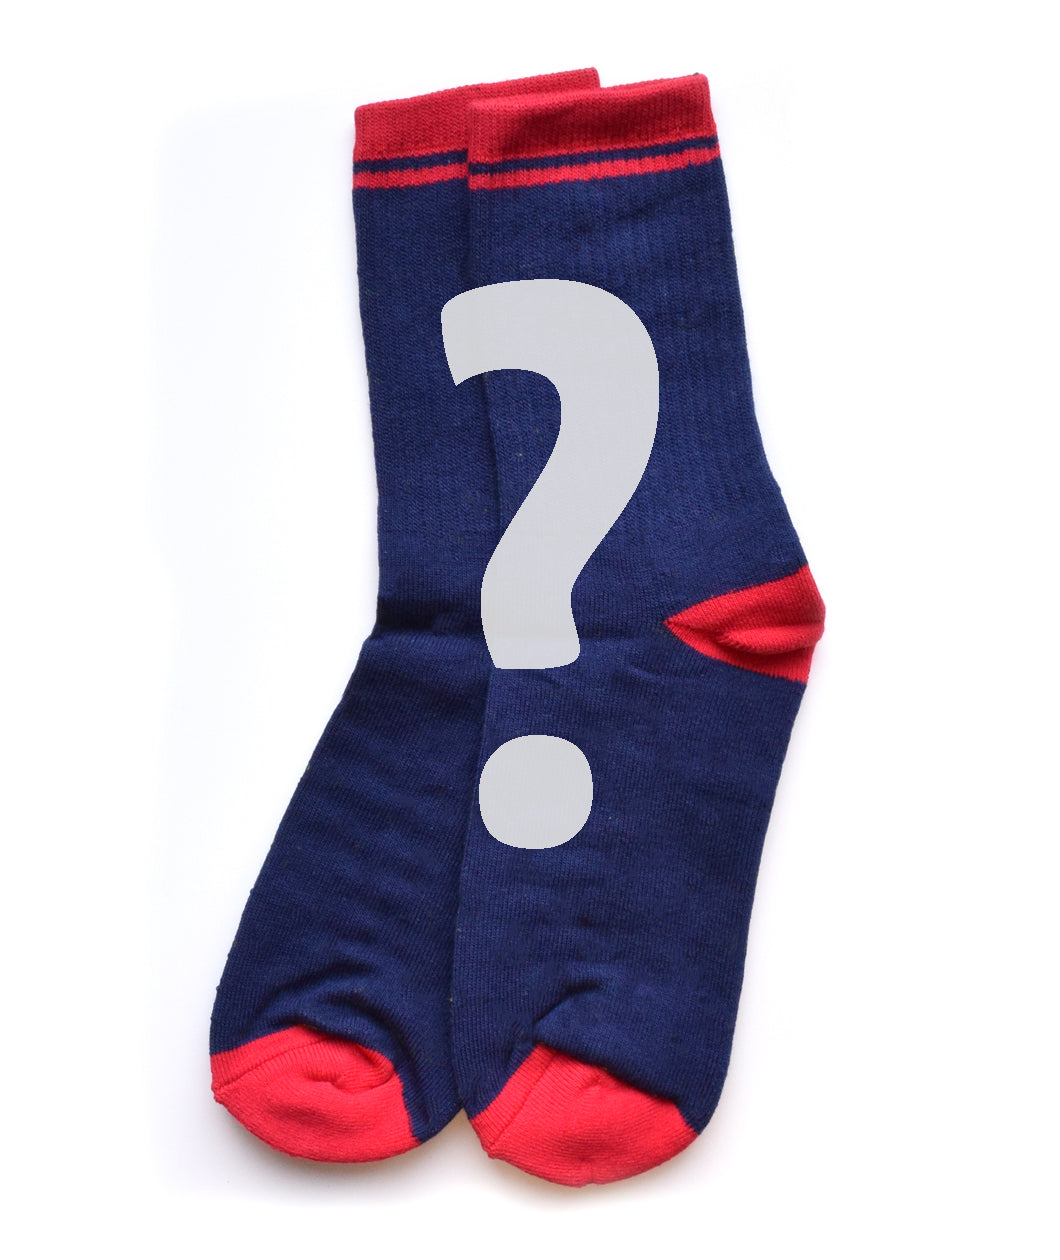 A pair of dark blue crew socks with a red toe, heel and band at the top. There is a grey question mark overplayed on top of them. 